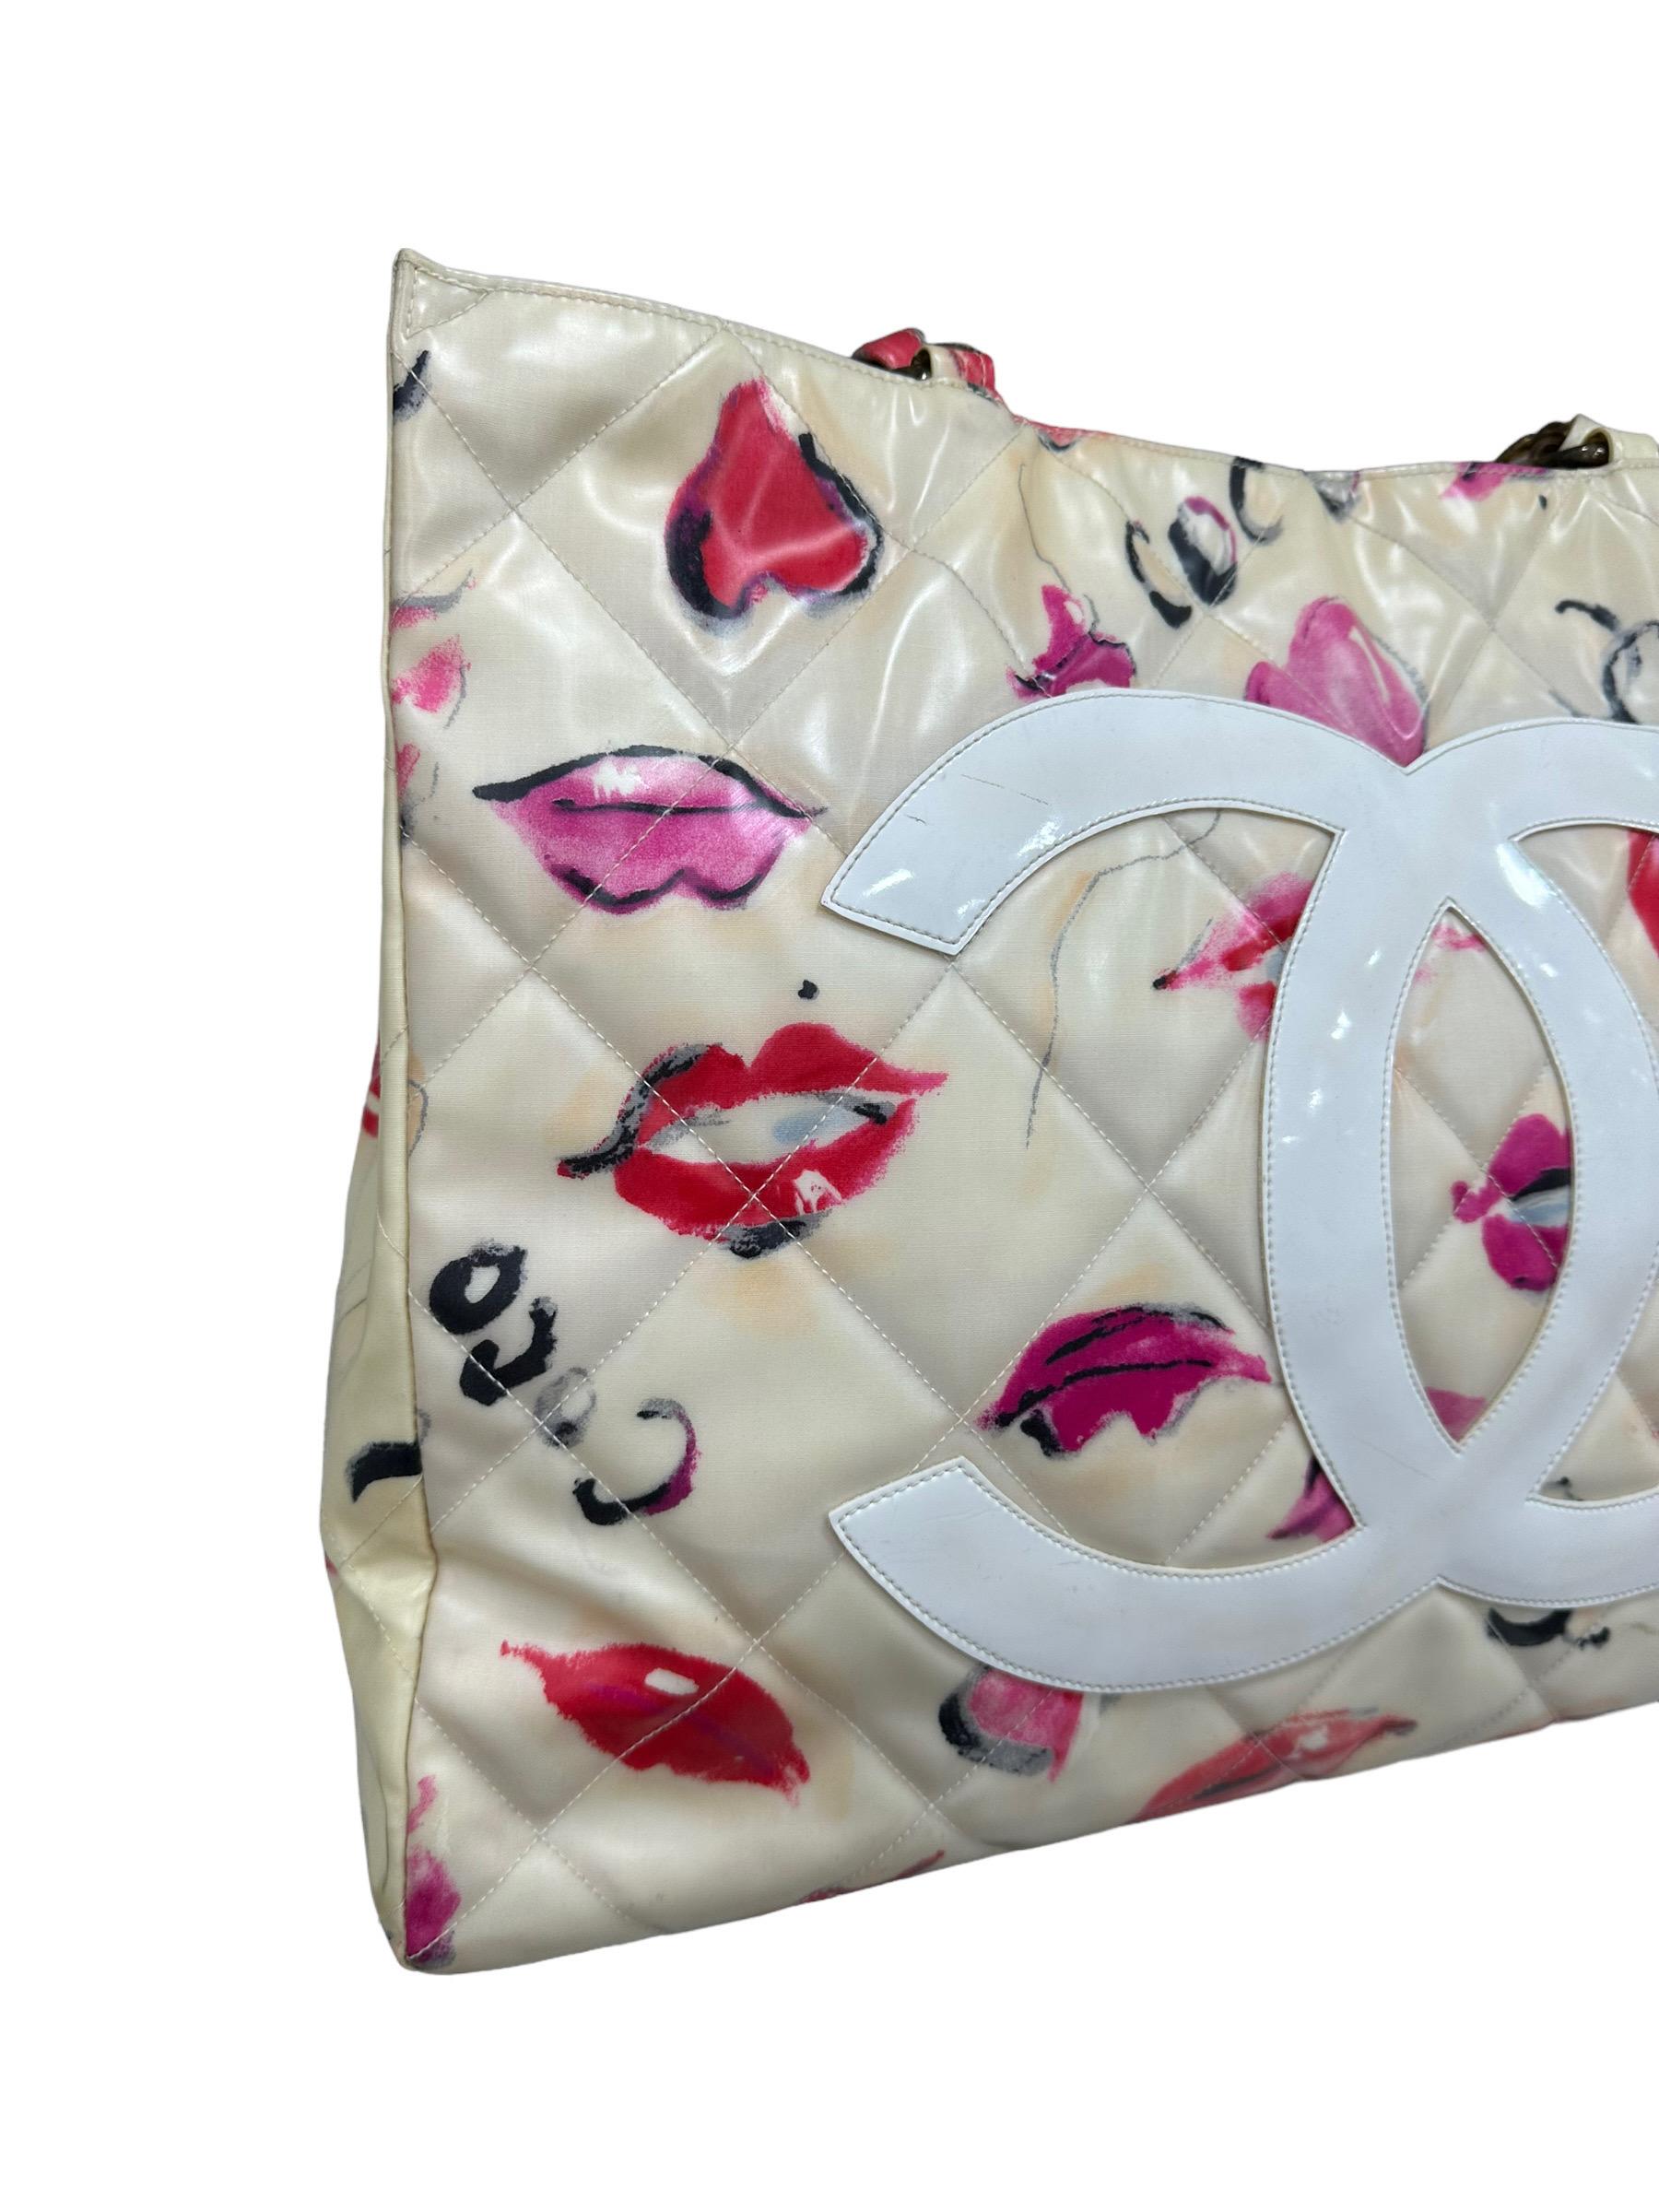 1994 Chanel Kisses & Lips Limited Edition Shoulder Bag In Good Condition For Sale In Torre Del Greco, IT